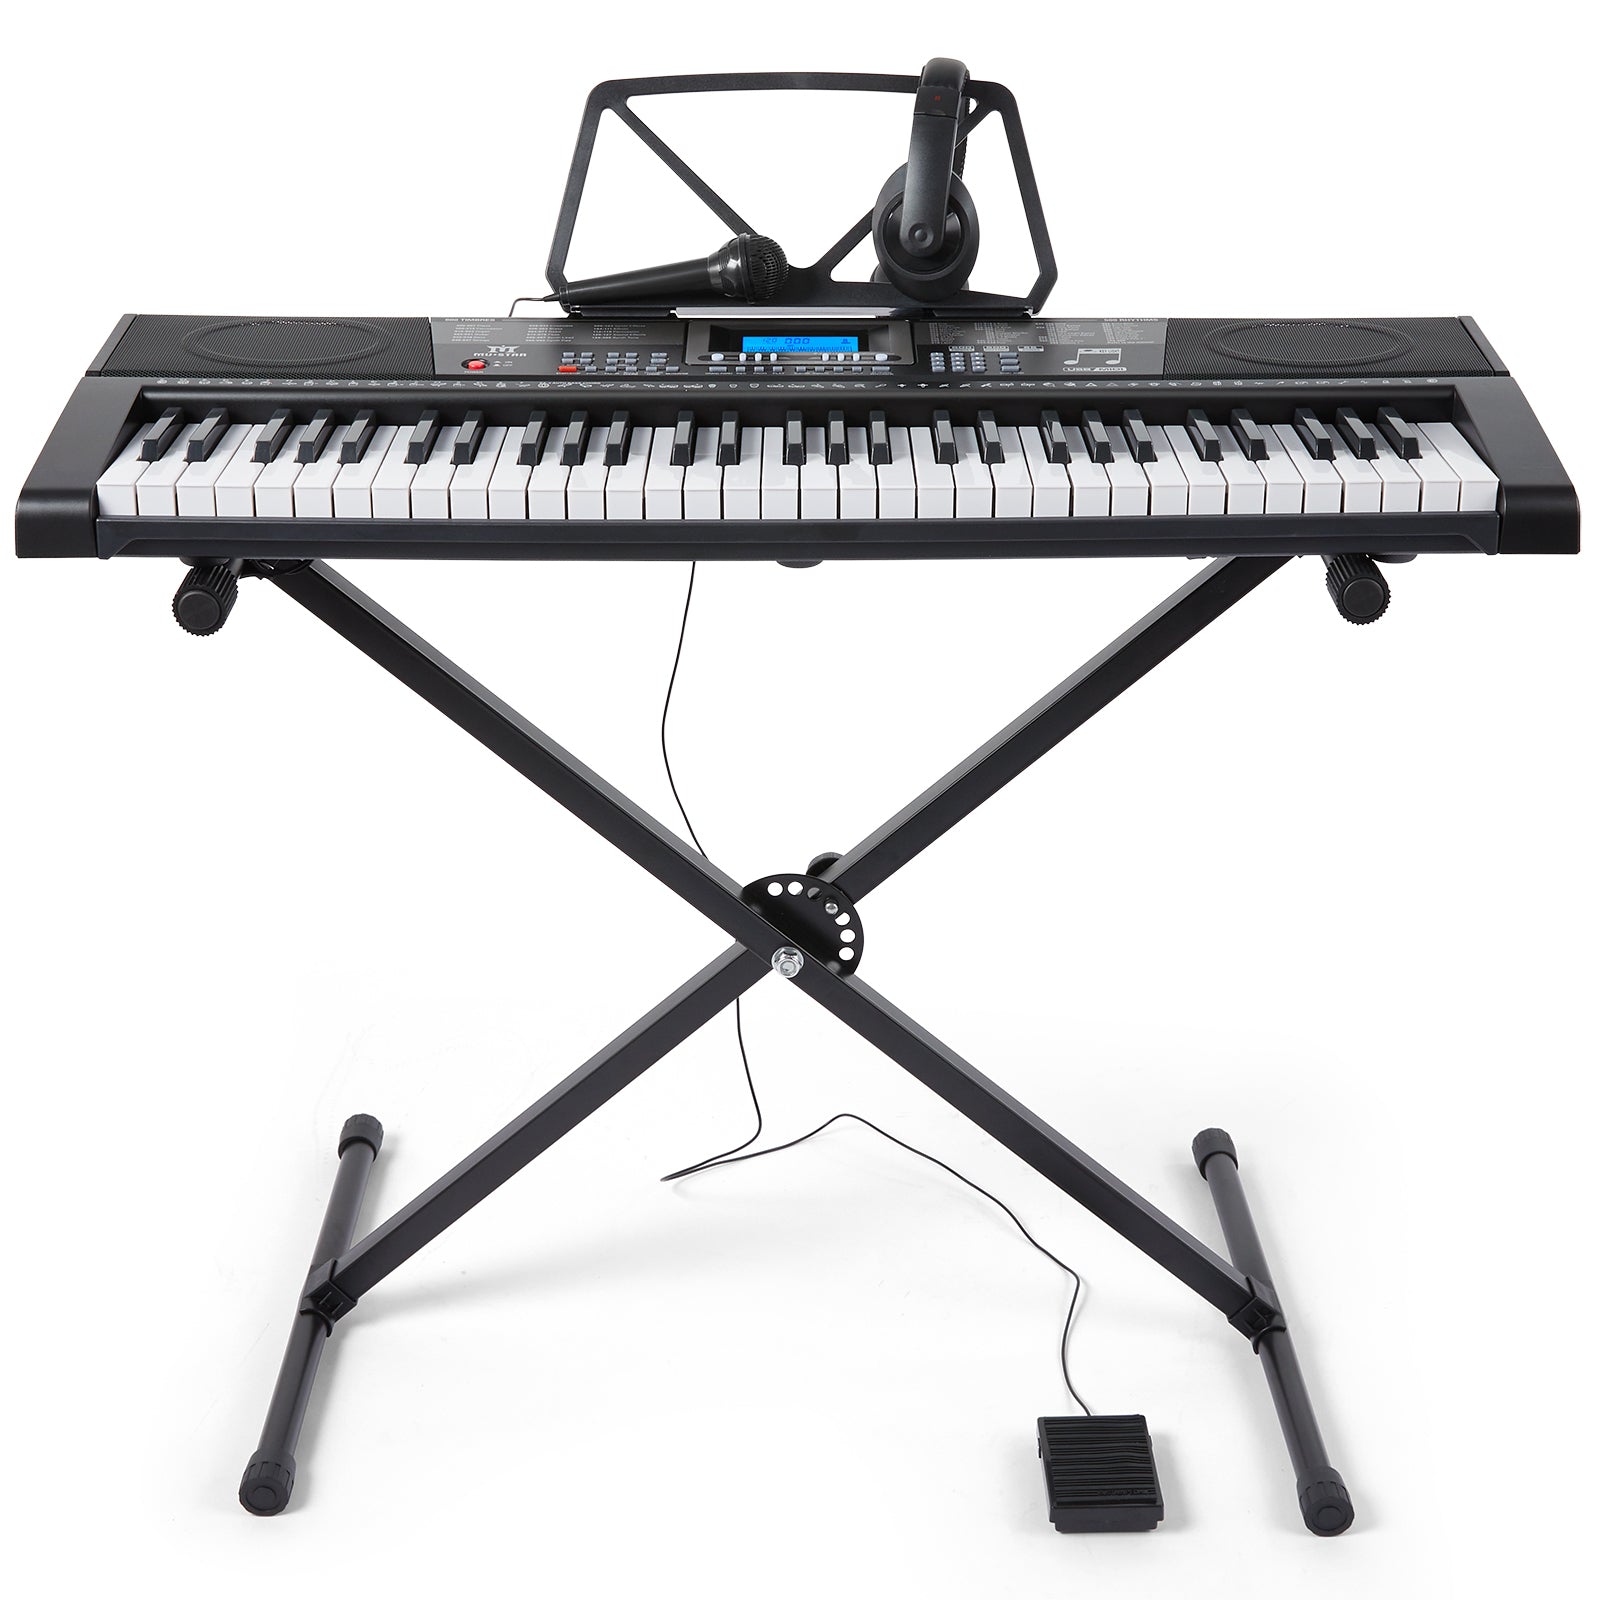  MUSTAR Piano Keyboard, MEKS-500 61 Key Learning Keyboard Piano  with Lighted Up Keys, Electric Piano Keyboard for Beginners, Stand, Sustain  Pedal, Headphones/Microphone, USB Midi, Built-in Speakers : Musical  Instruments